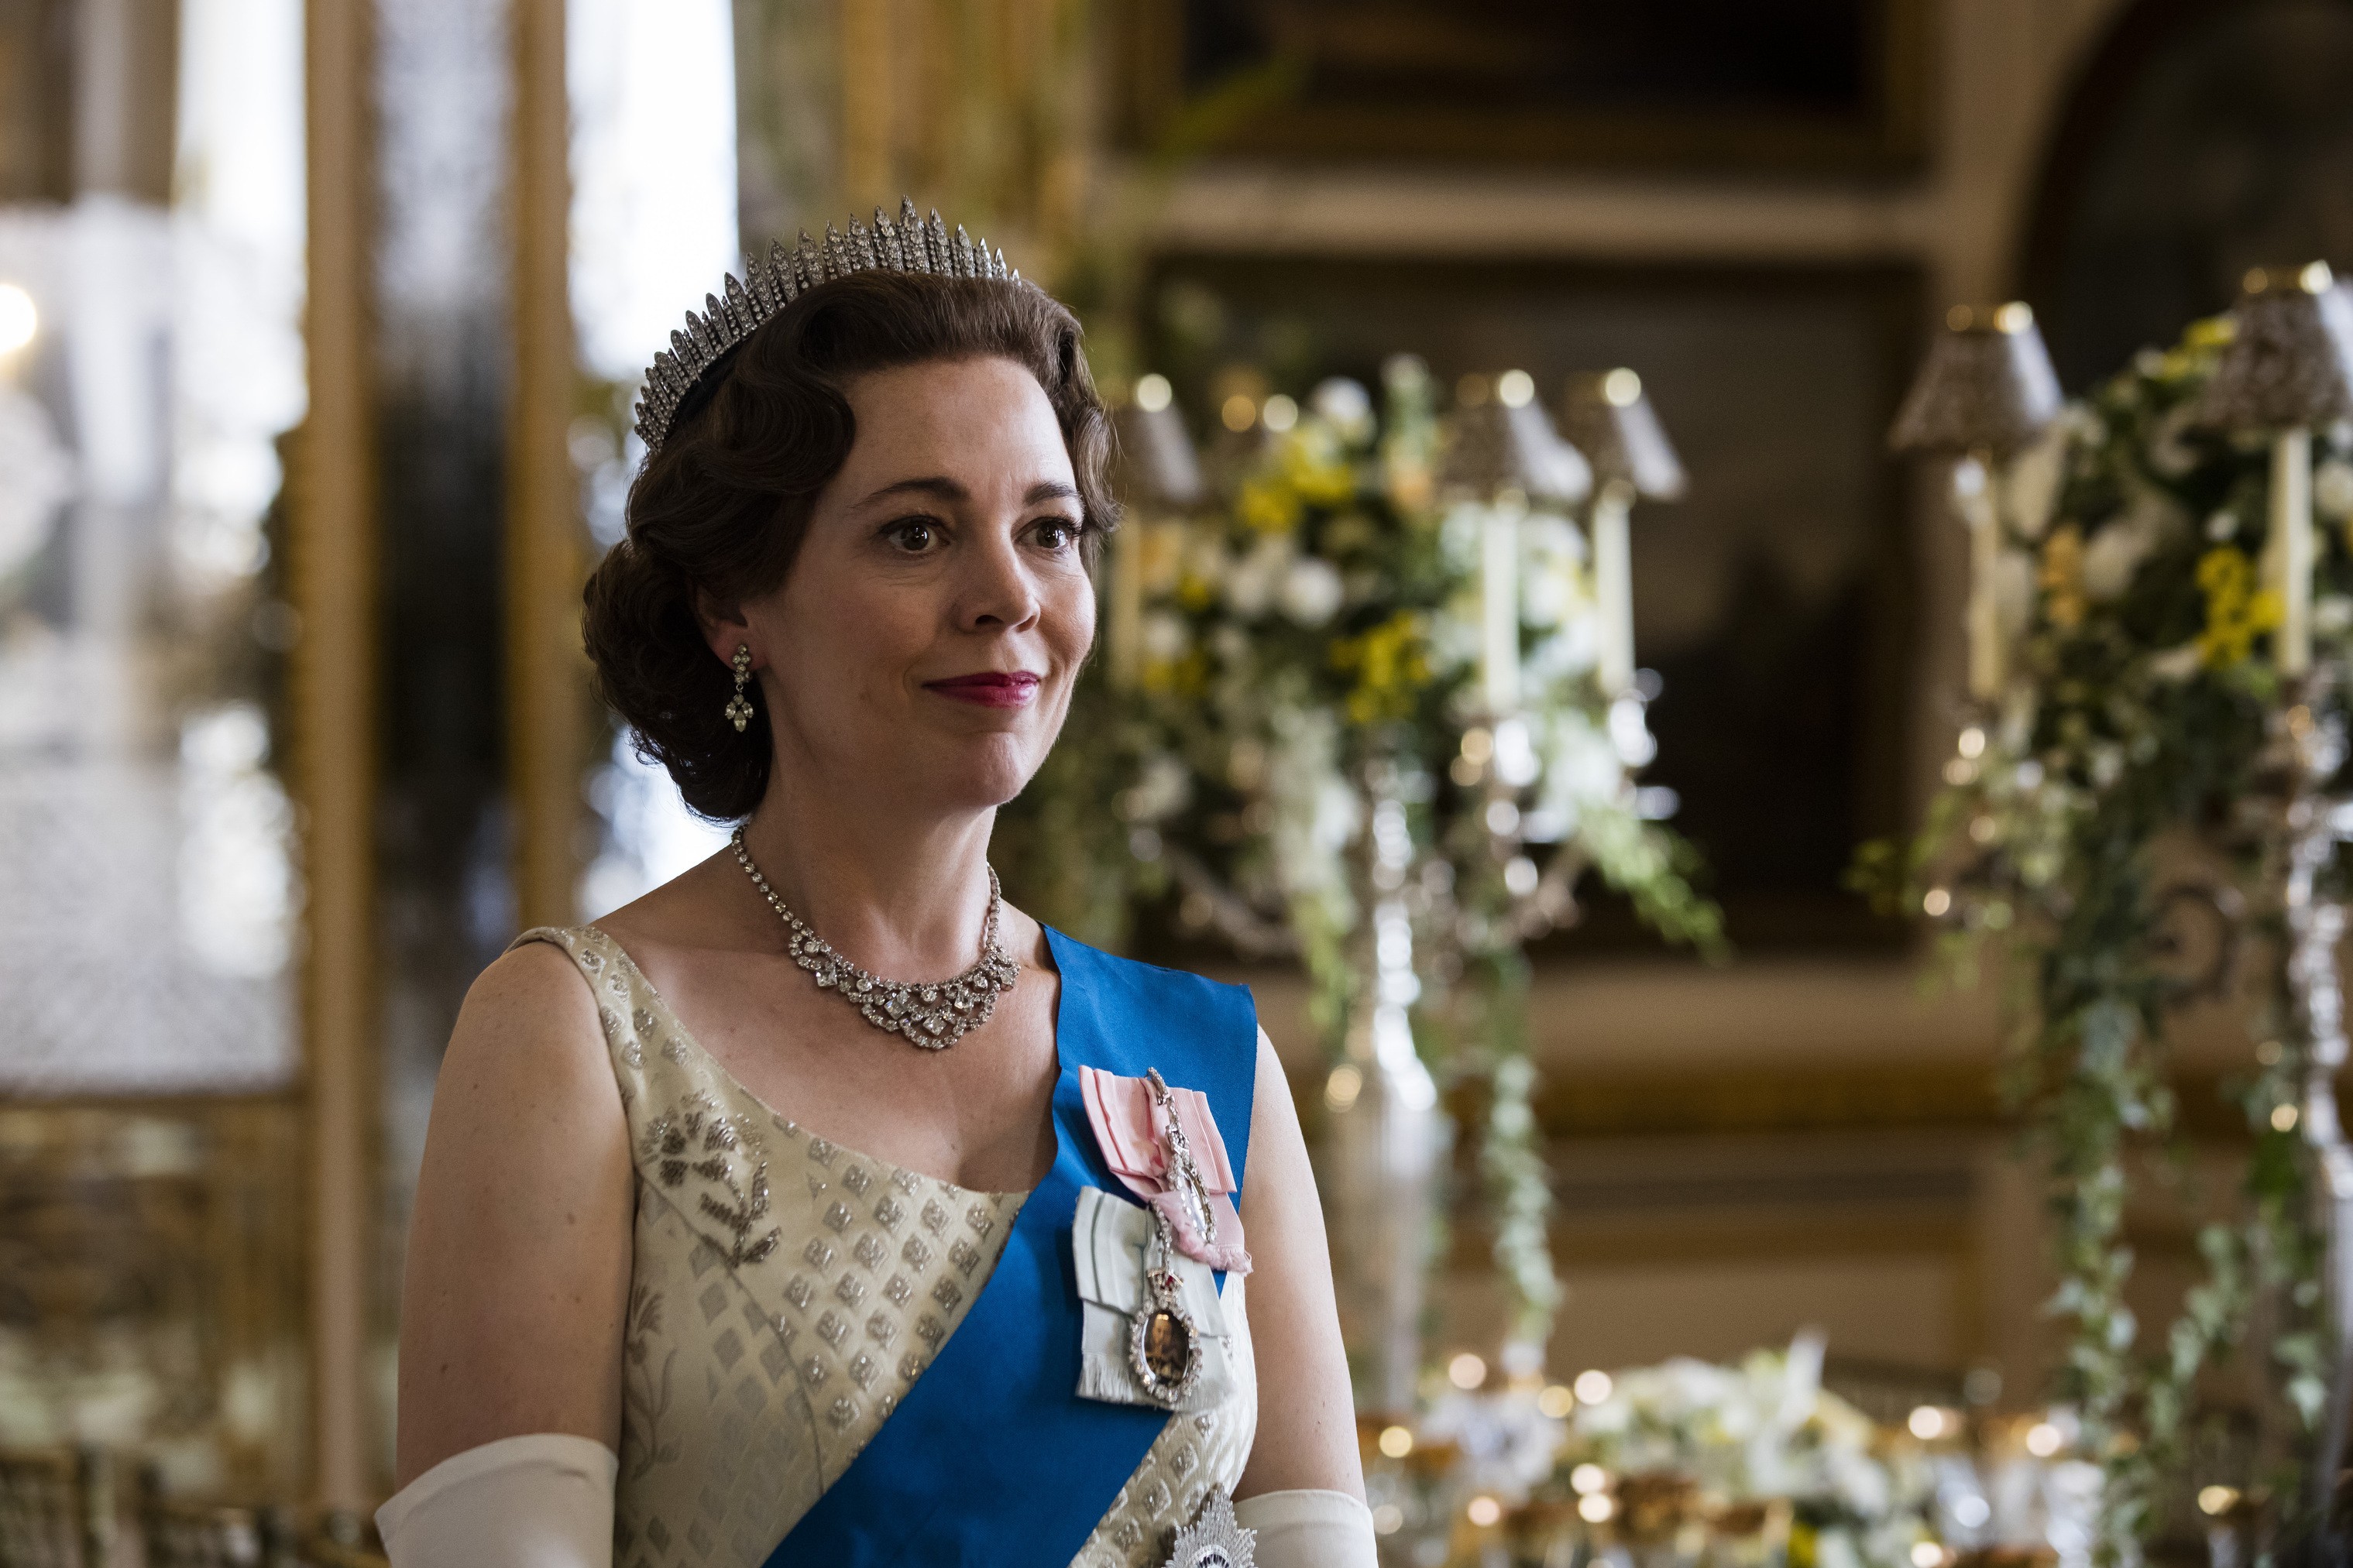 Netflix's The Crown showcases Queen Elizabeth's life and times – but what  are the crown jewels really worth?